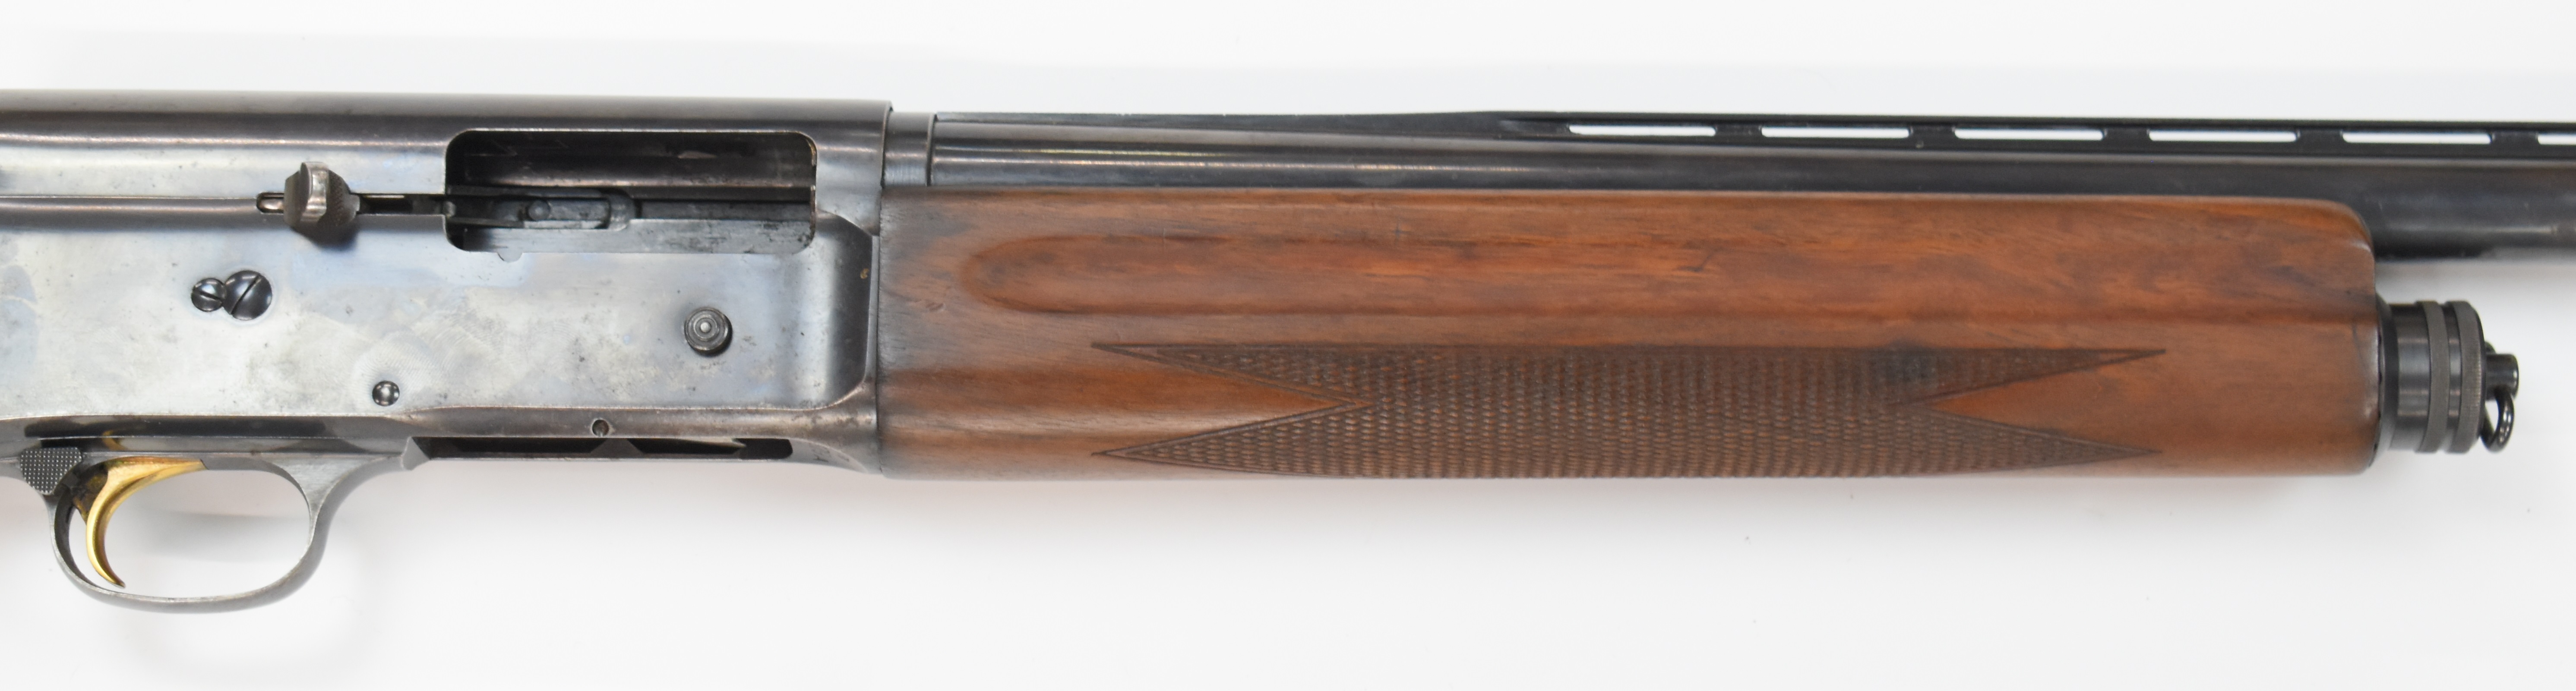 Browning 16 bore 3-shot semi-automatic shotgun with chequered semi-pistol grip and forend and 27 - Image 7 of 18